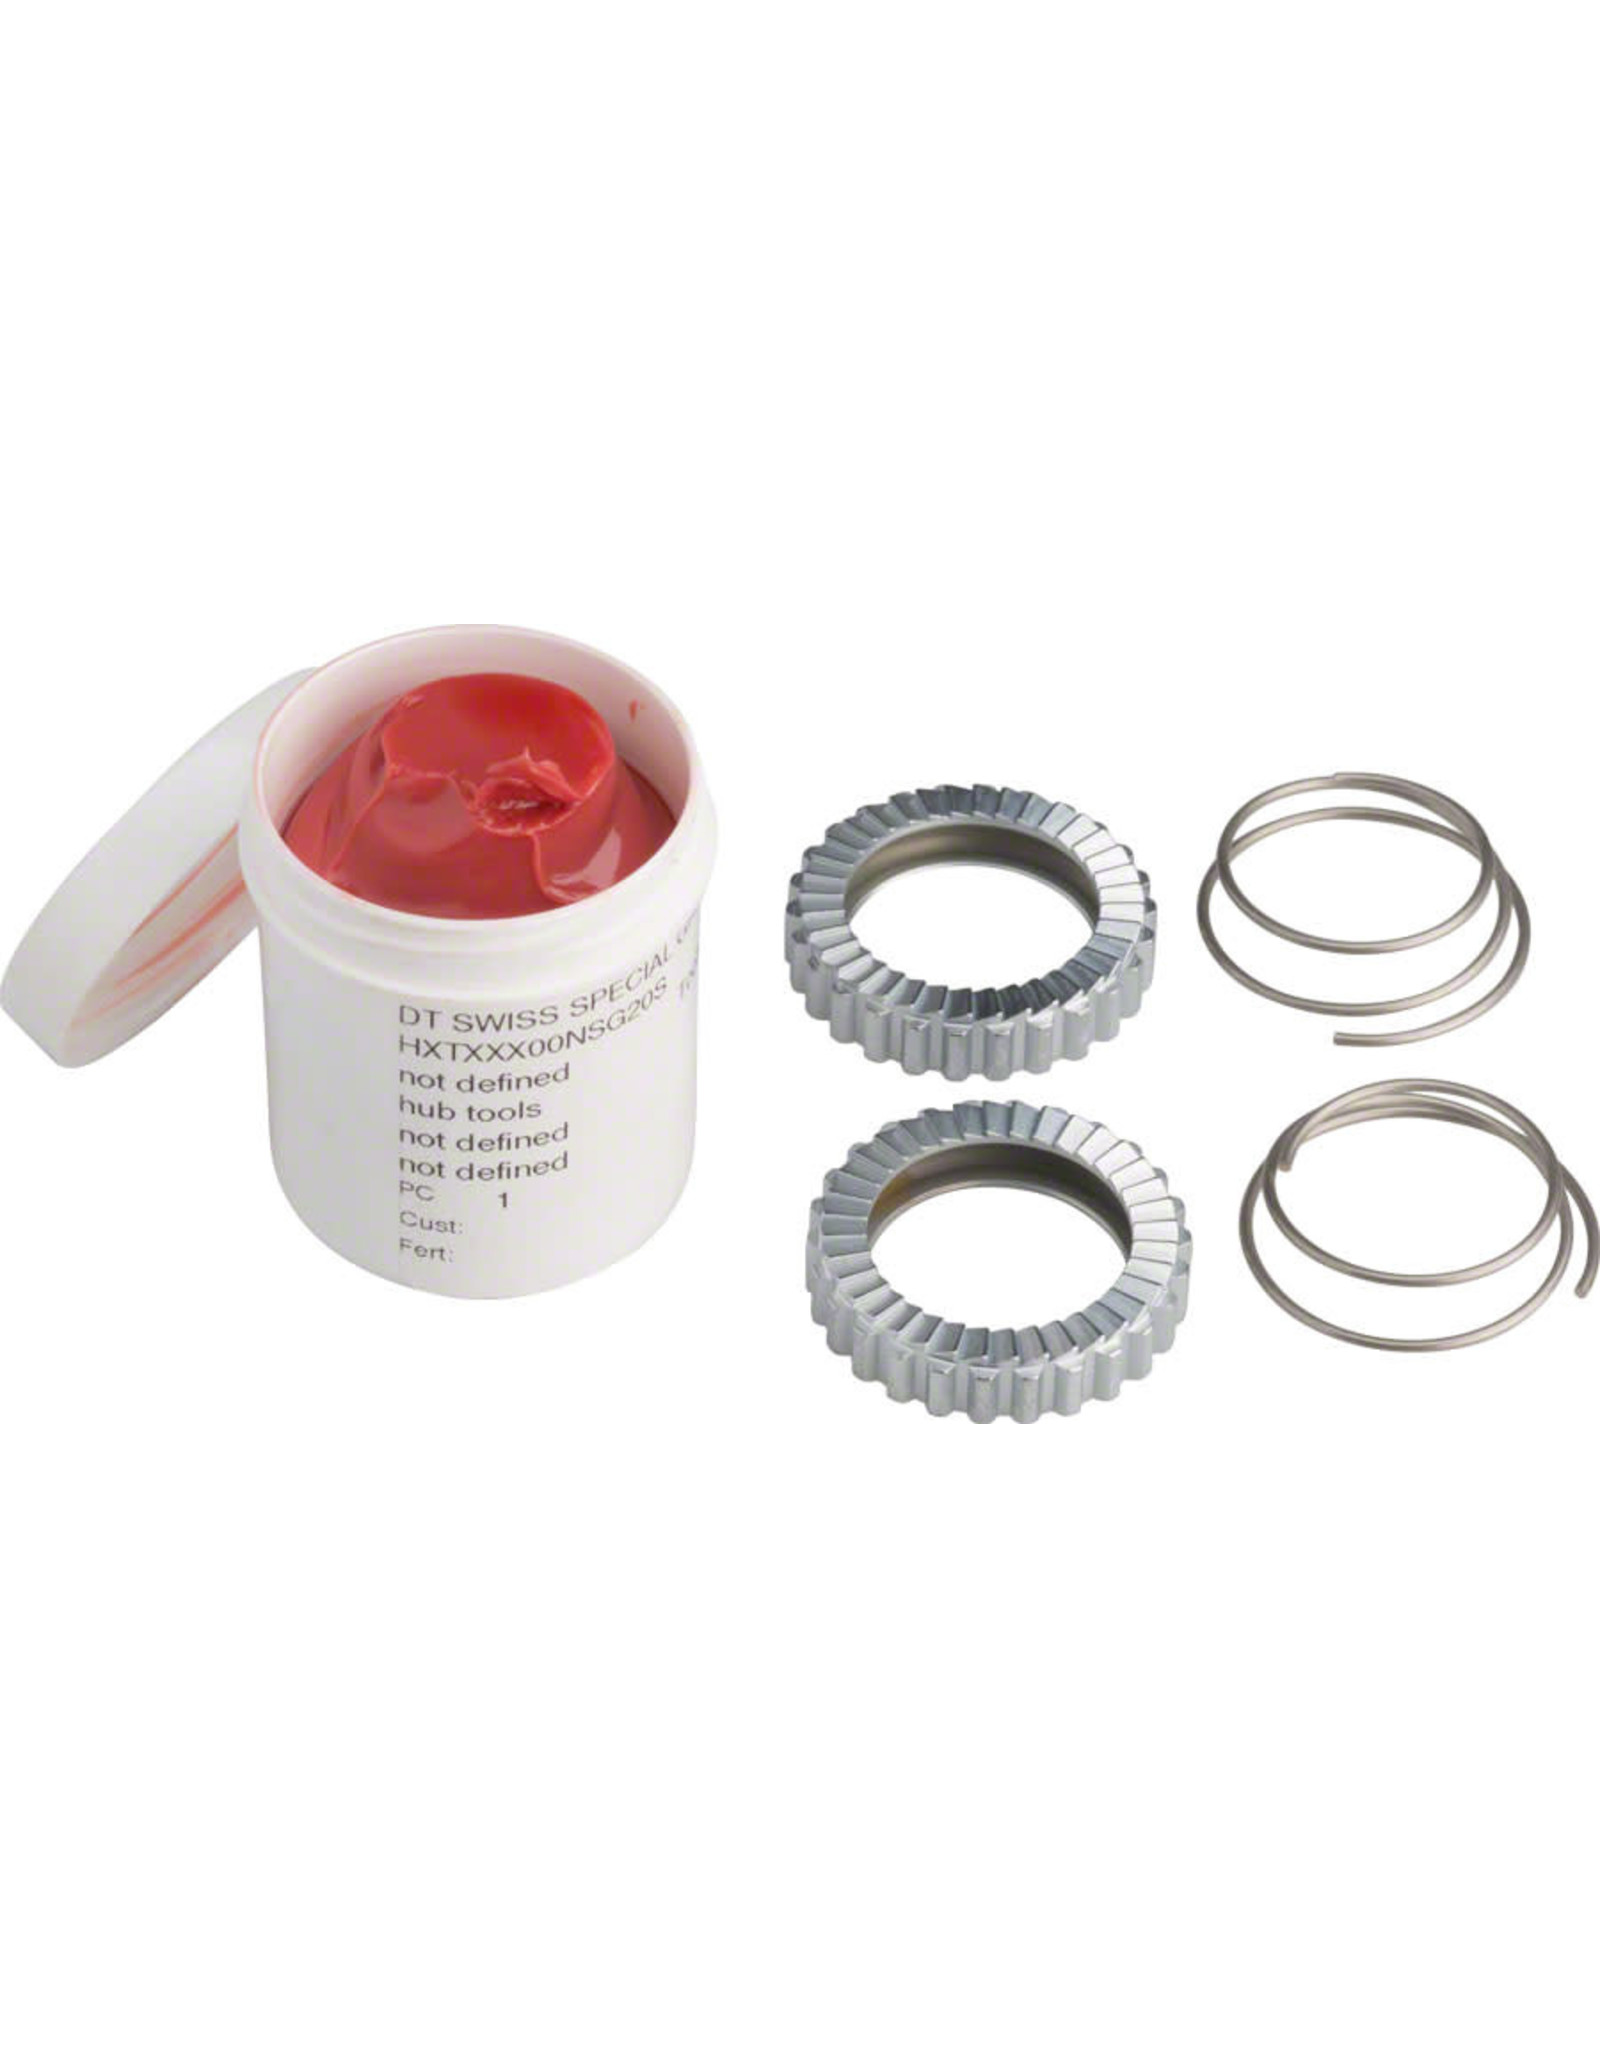 DT Swiss DT Swiss Ratchet and Pawl Freehub Service Kit